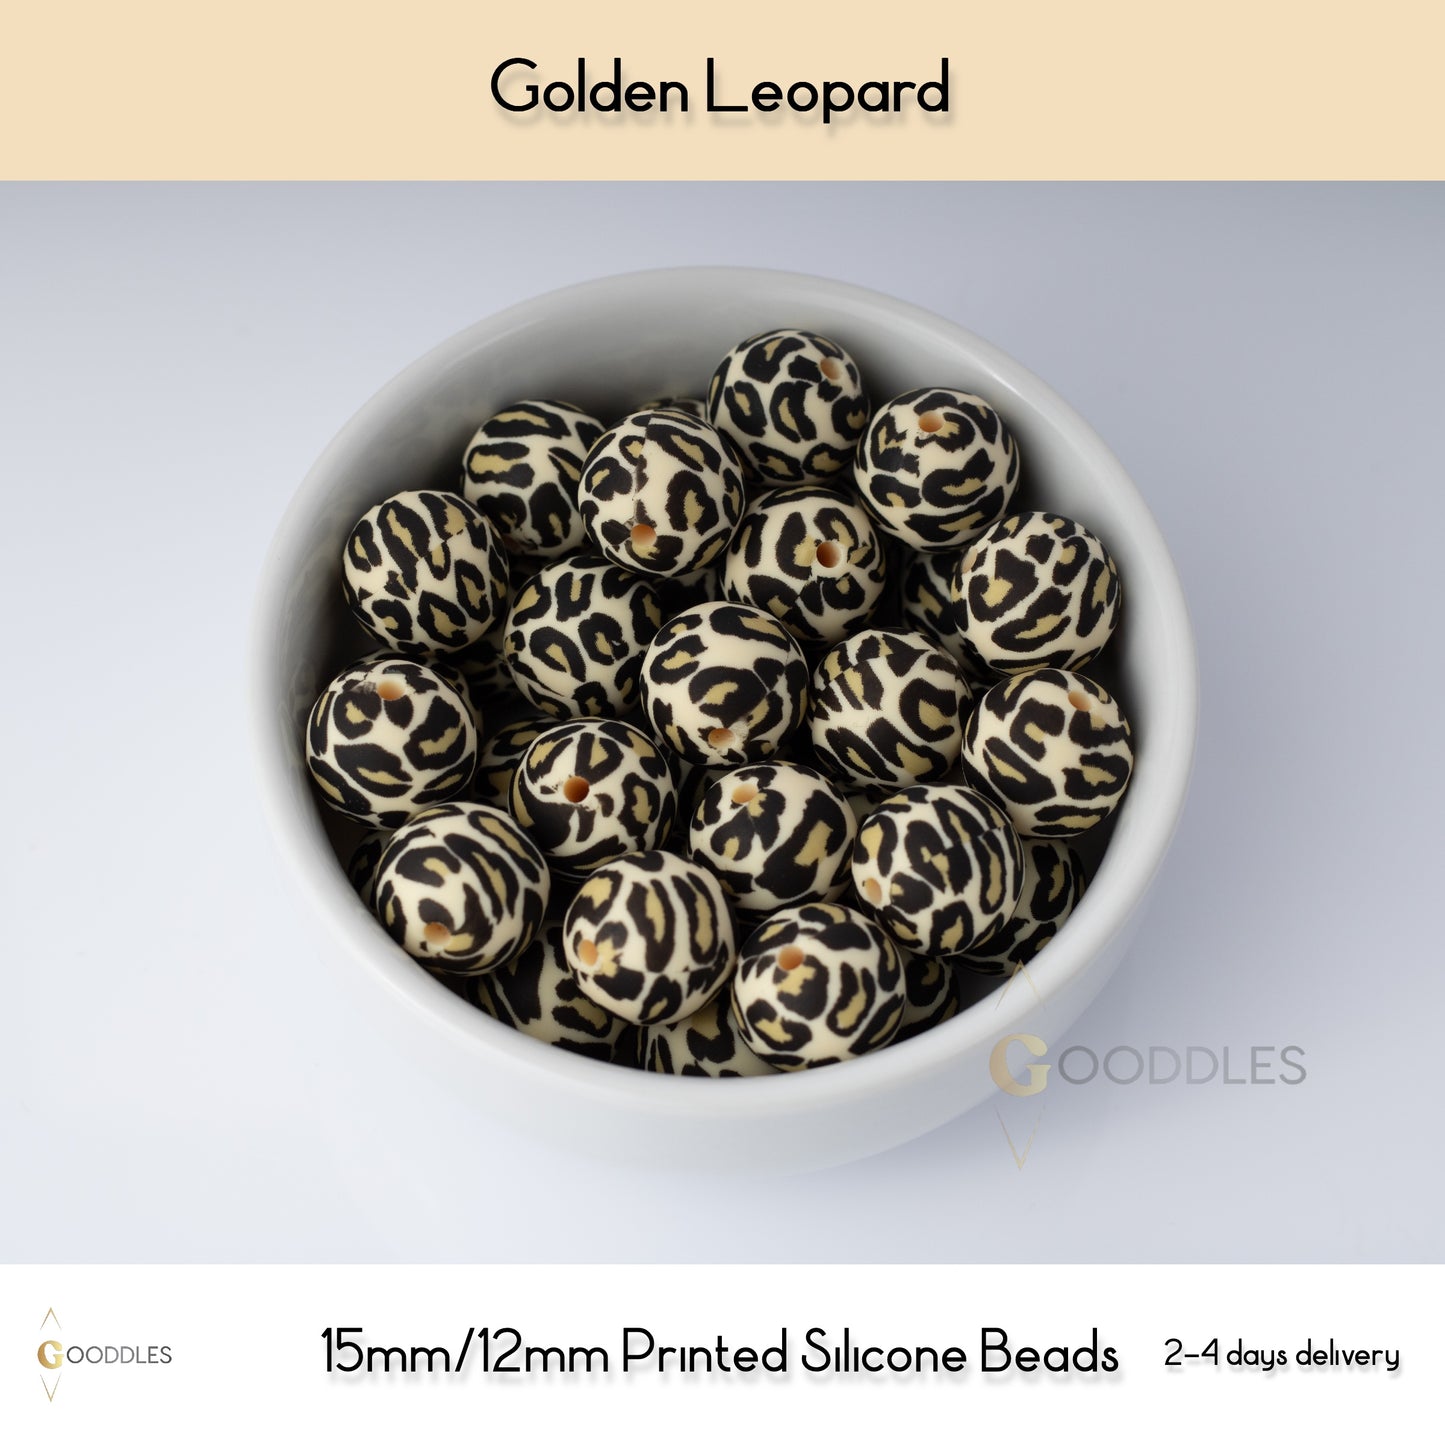 5pcs, Golden Leopard Silicone Beads Printed Round Silicone Beads